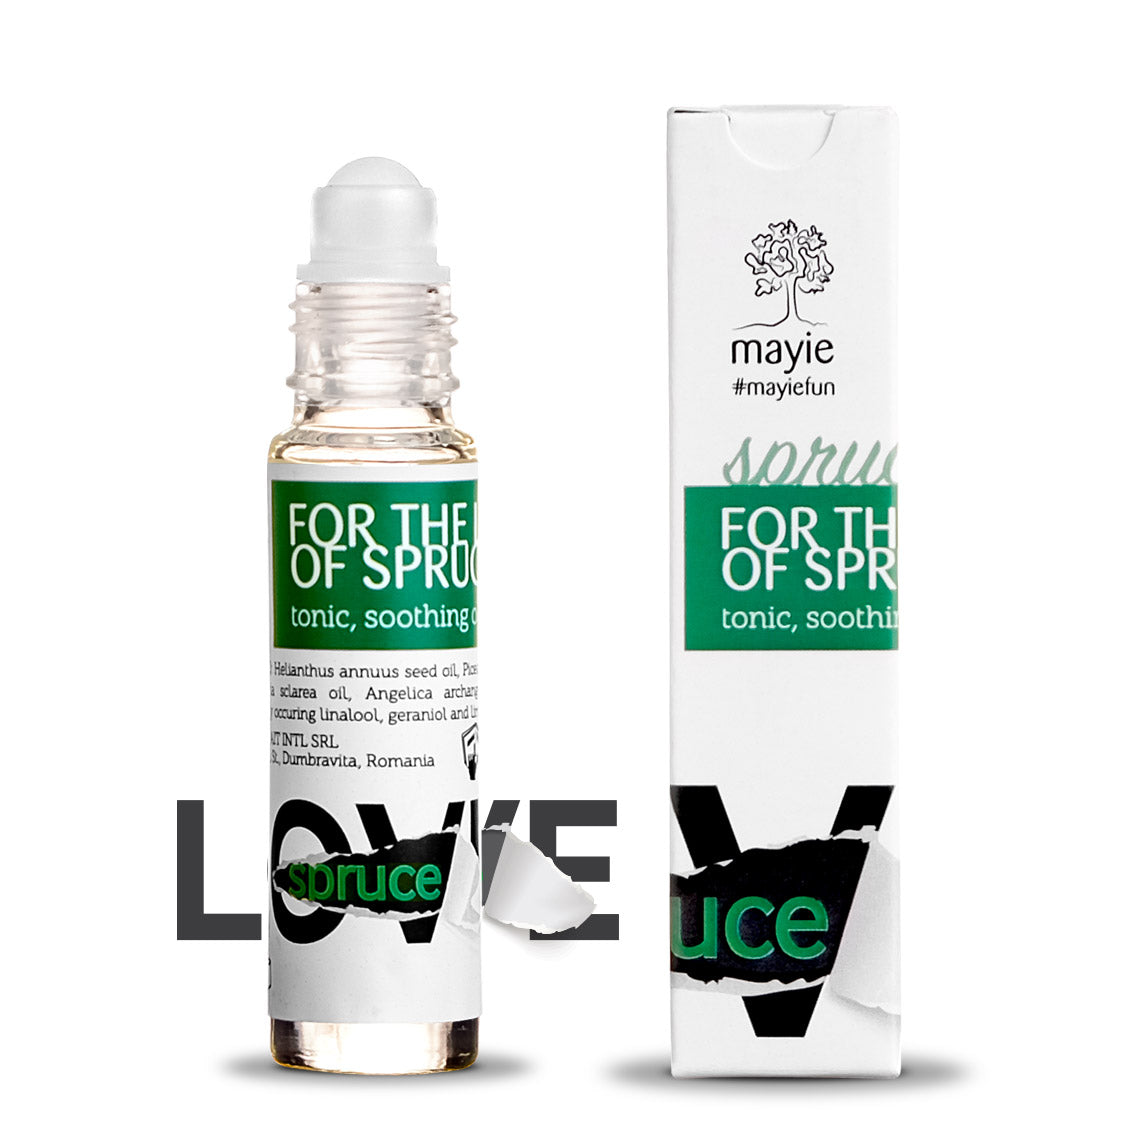 For the Love of Spruce, Roll-on Molid, #mayiefun, 10ml